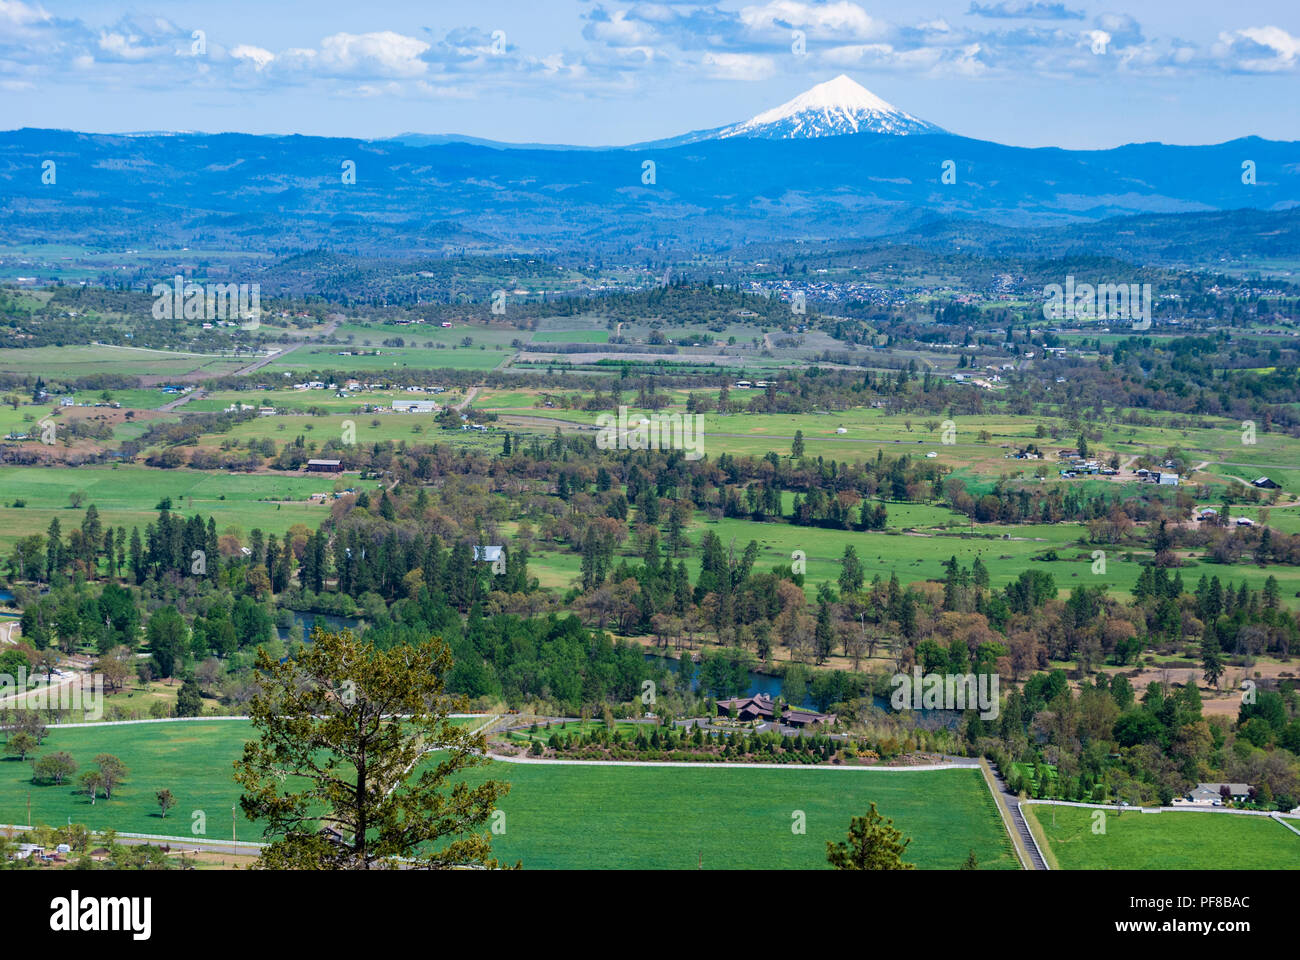 panorama view of mt mcloughlin and the rogue river valley from the table rocks plateau in southern oregon Stock Photo